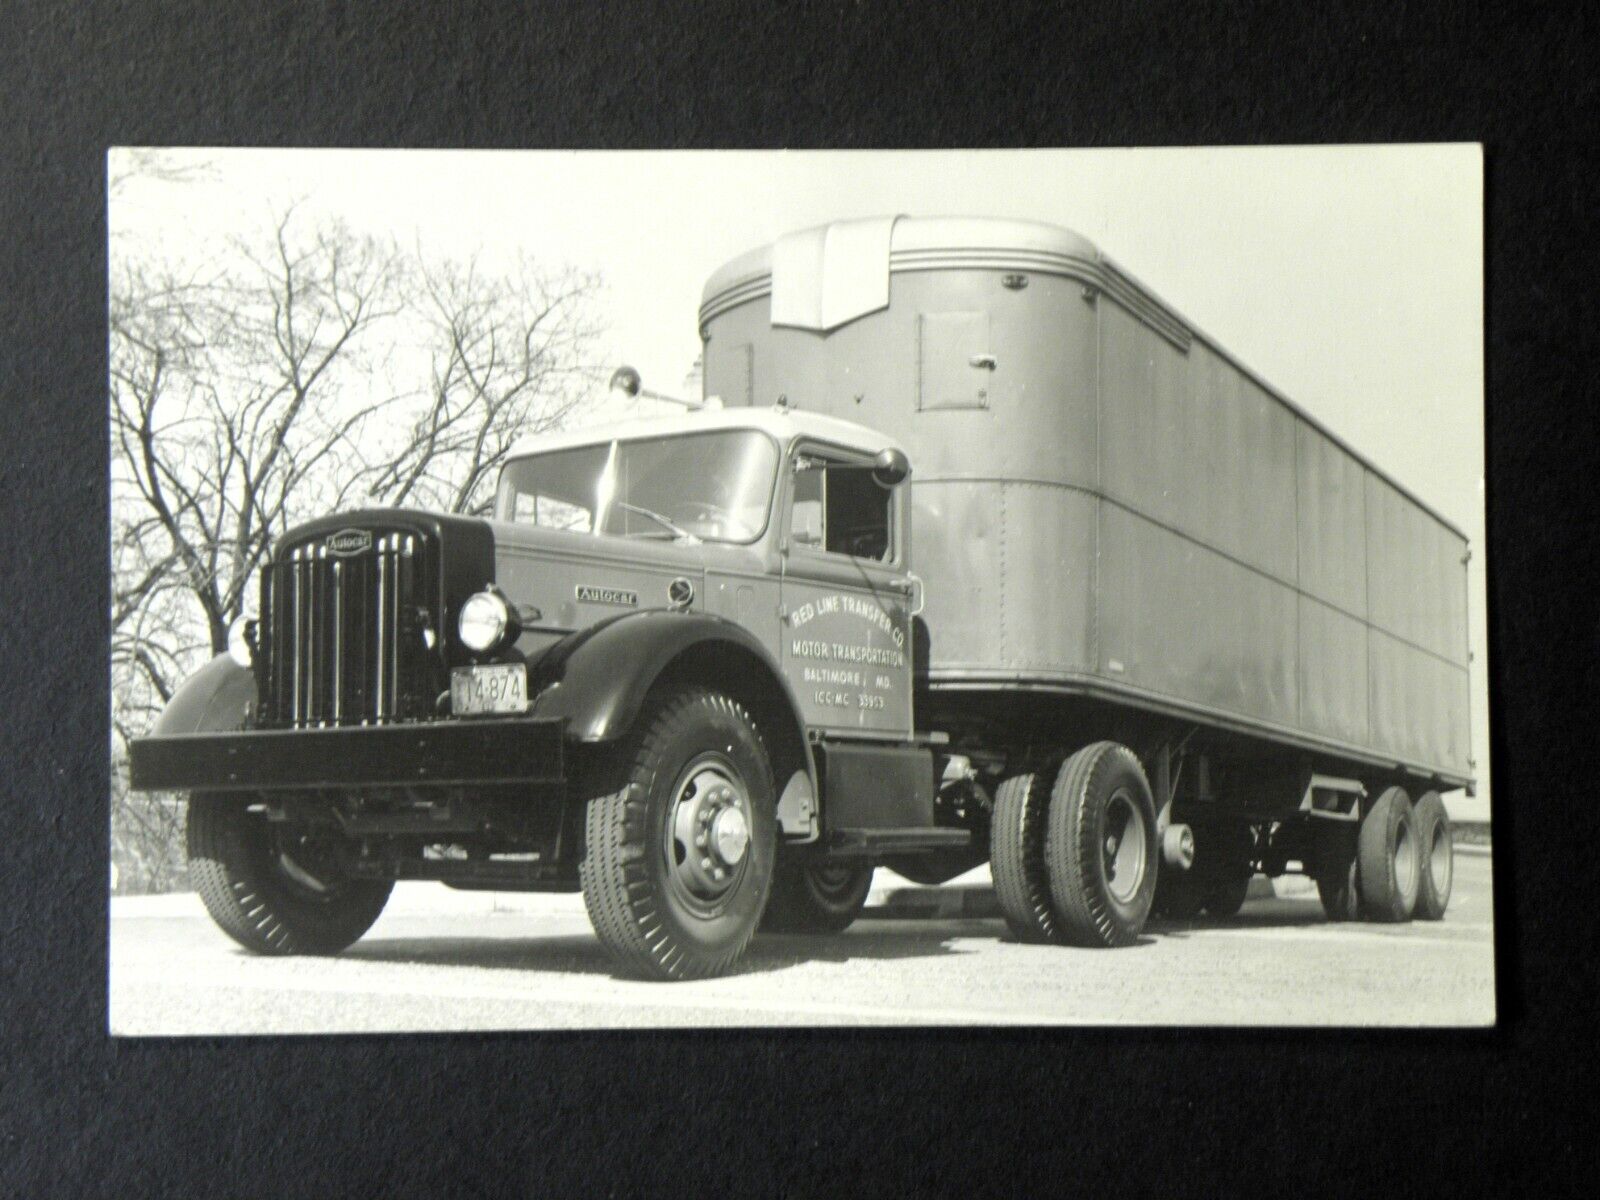 AUTOCAR TRUCK- RED LINE TRANSFER- REAL PHOTO ADVERTISEMENT CARD-POSTMARK 1951